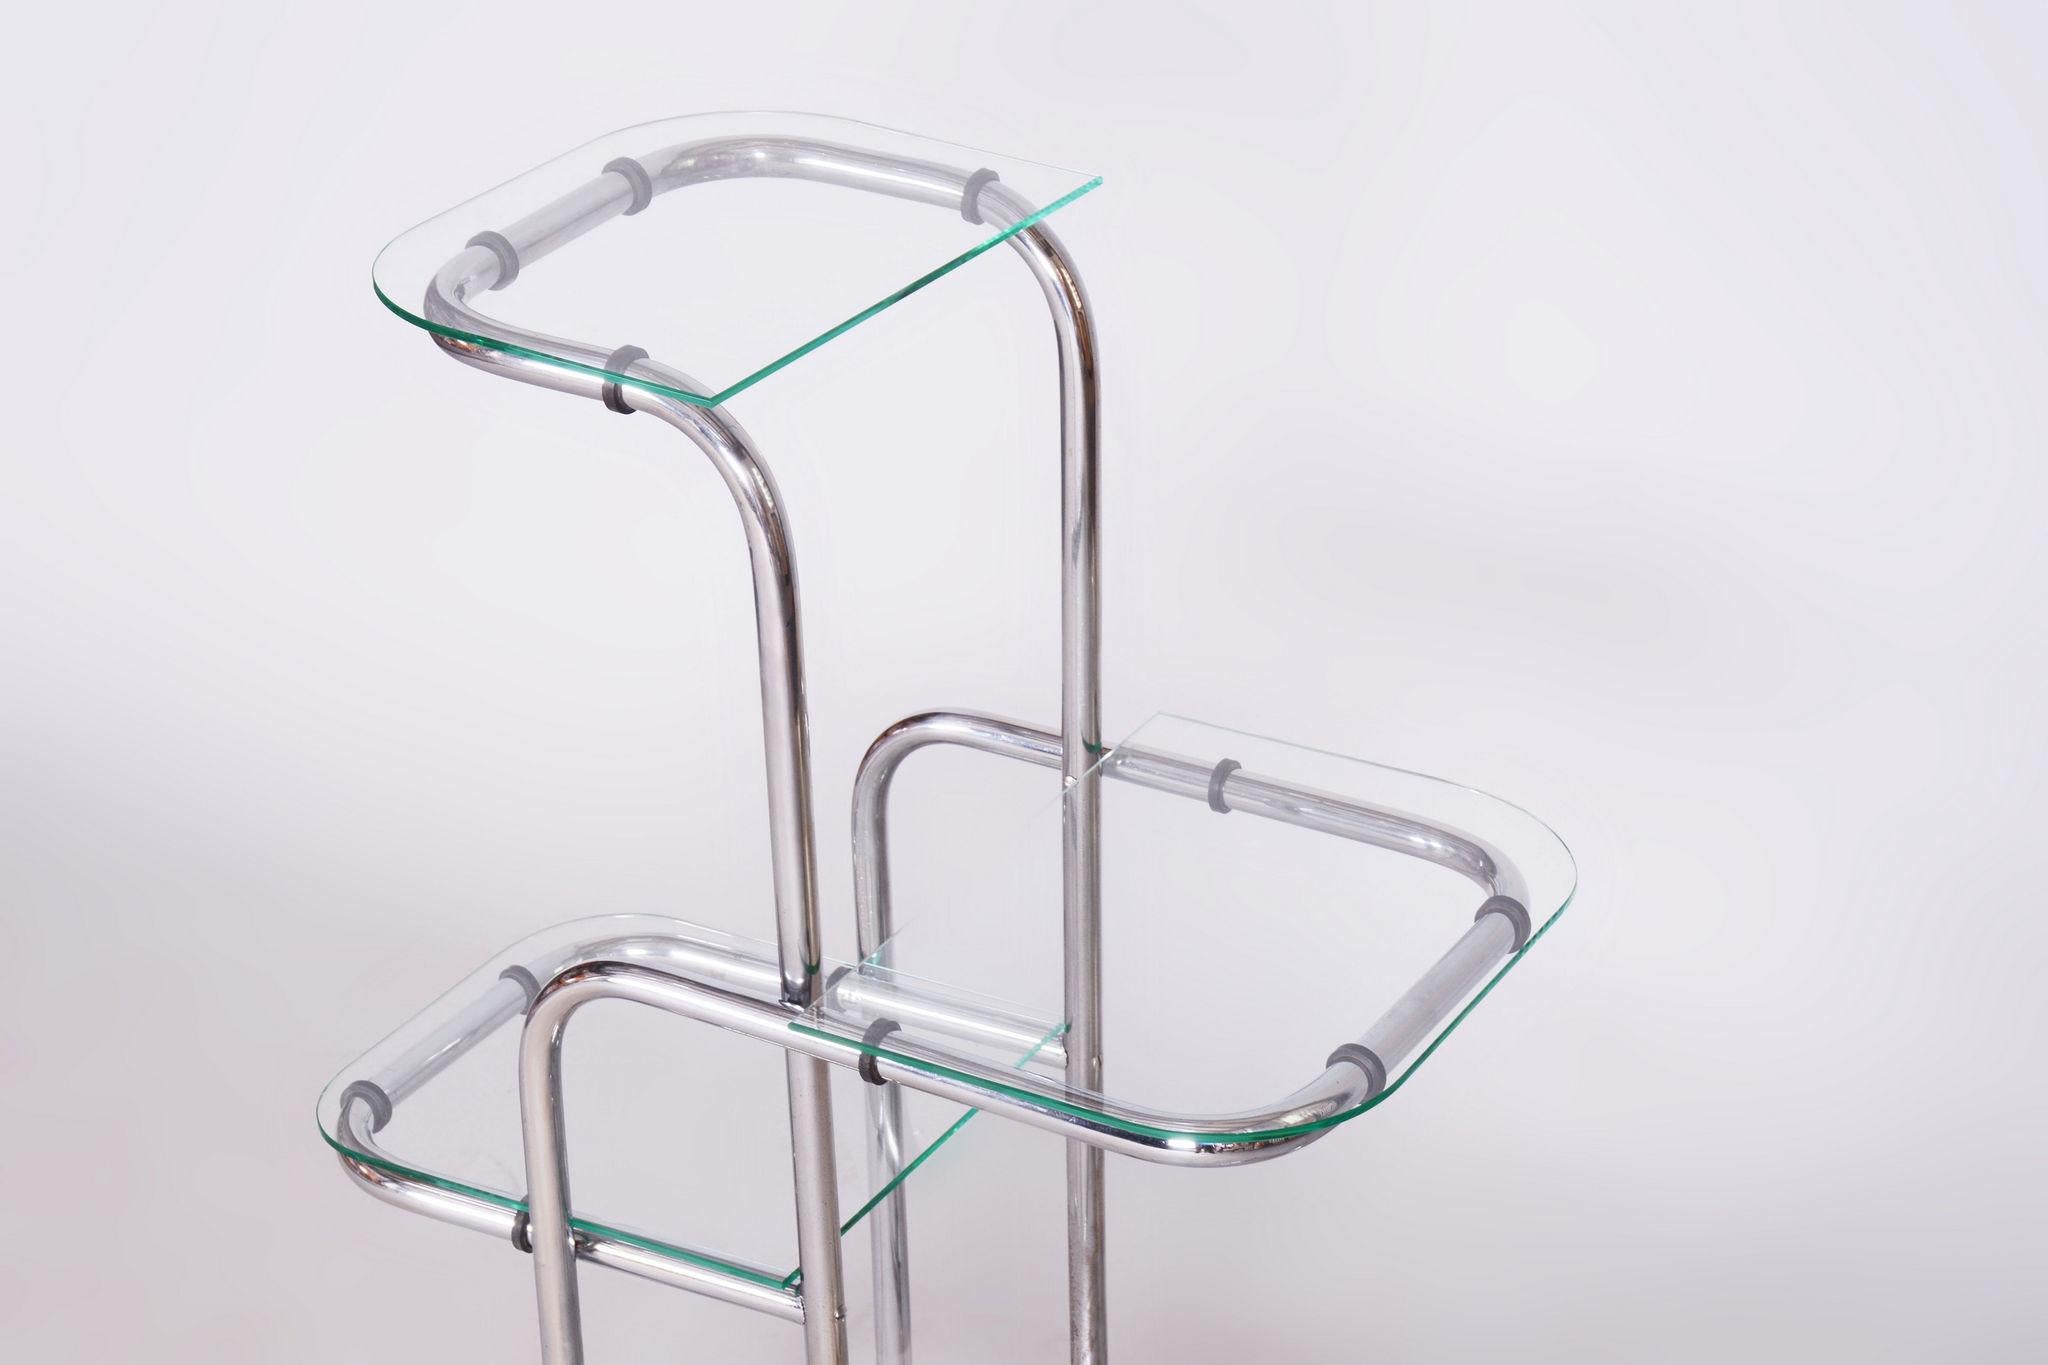 Mid-20th Century Restored Bauhaus Etagere, Chrome-Plated Steel, Czechia, 1930s For Sale